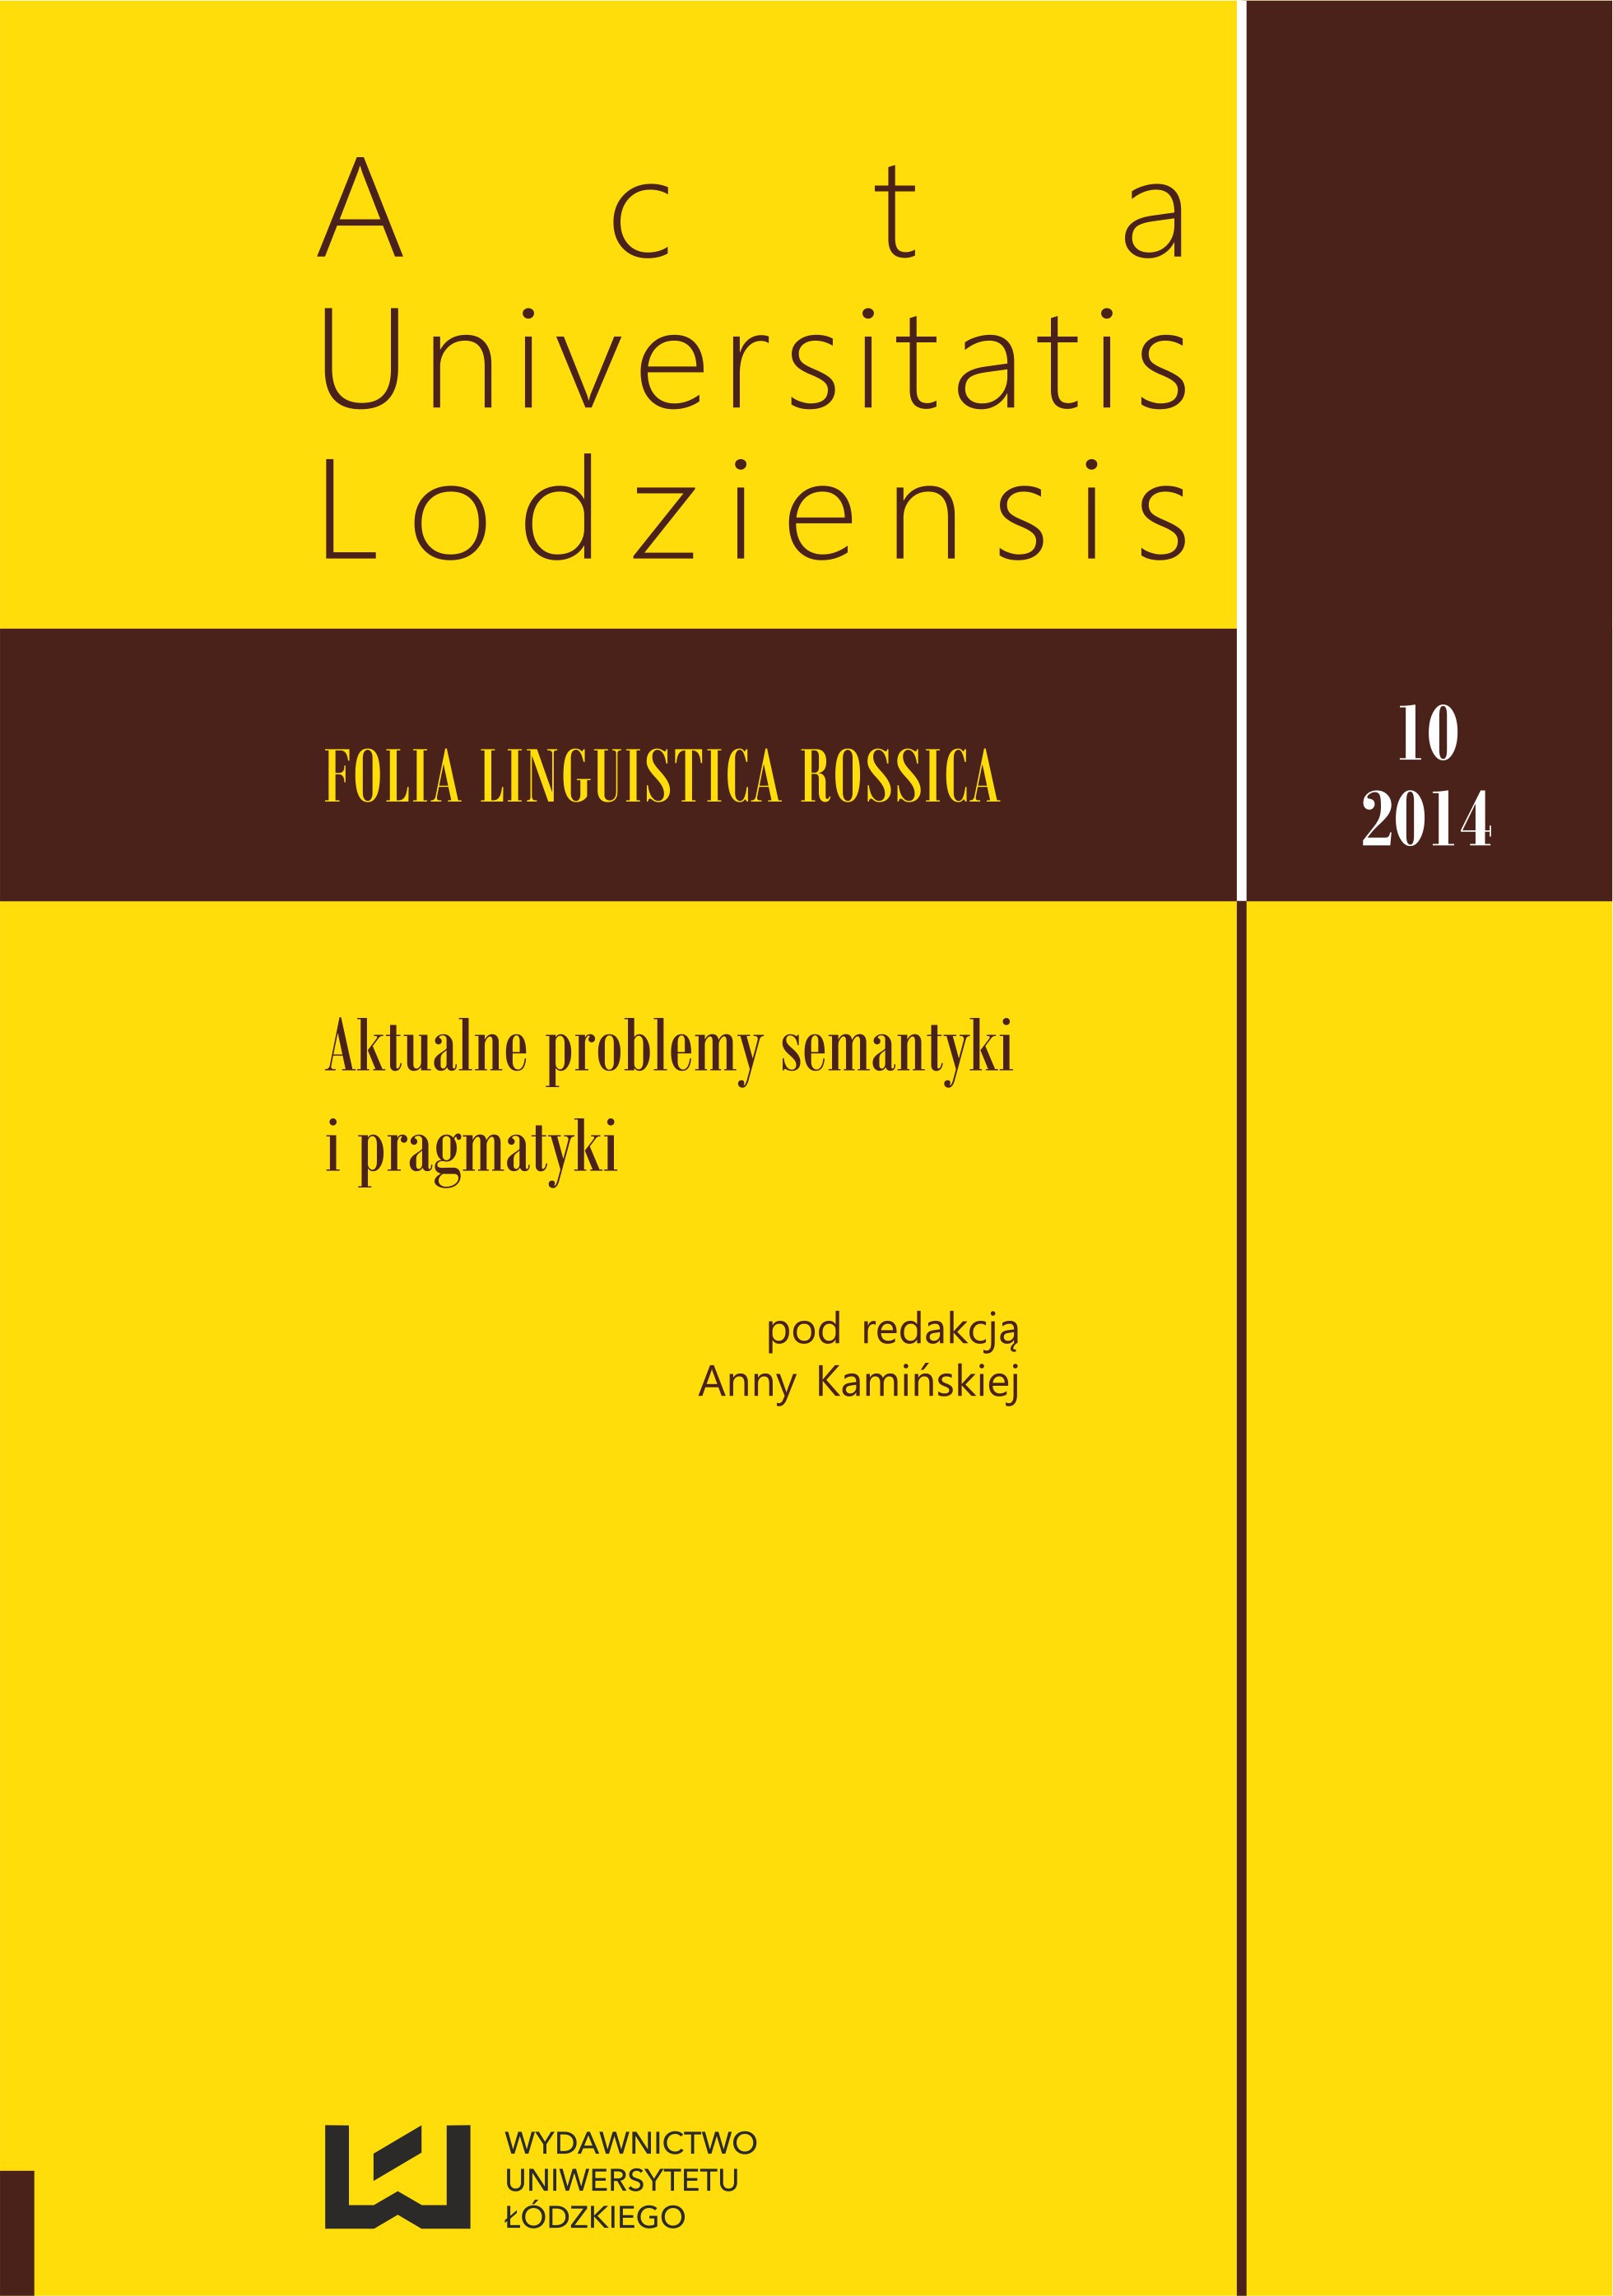 THE DAWN AND OTHER TRANSLATIONS OF WŁADYSŁAW ORKAN’S WORKS INTO THE RUSSIAN LANGUAGE Cover Image